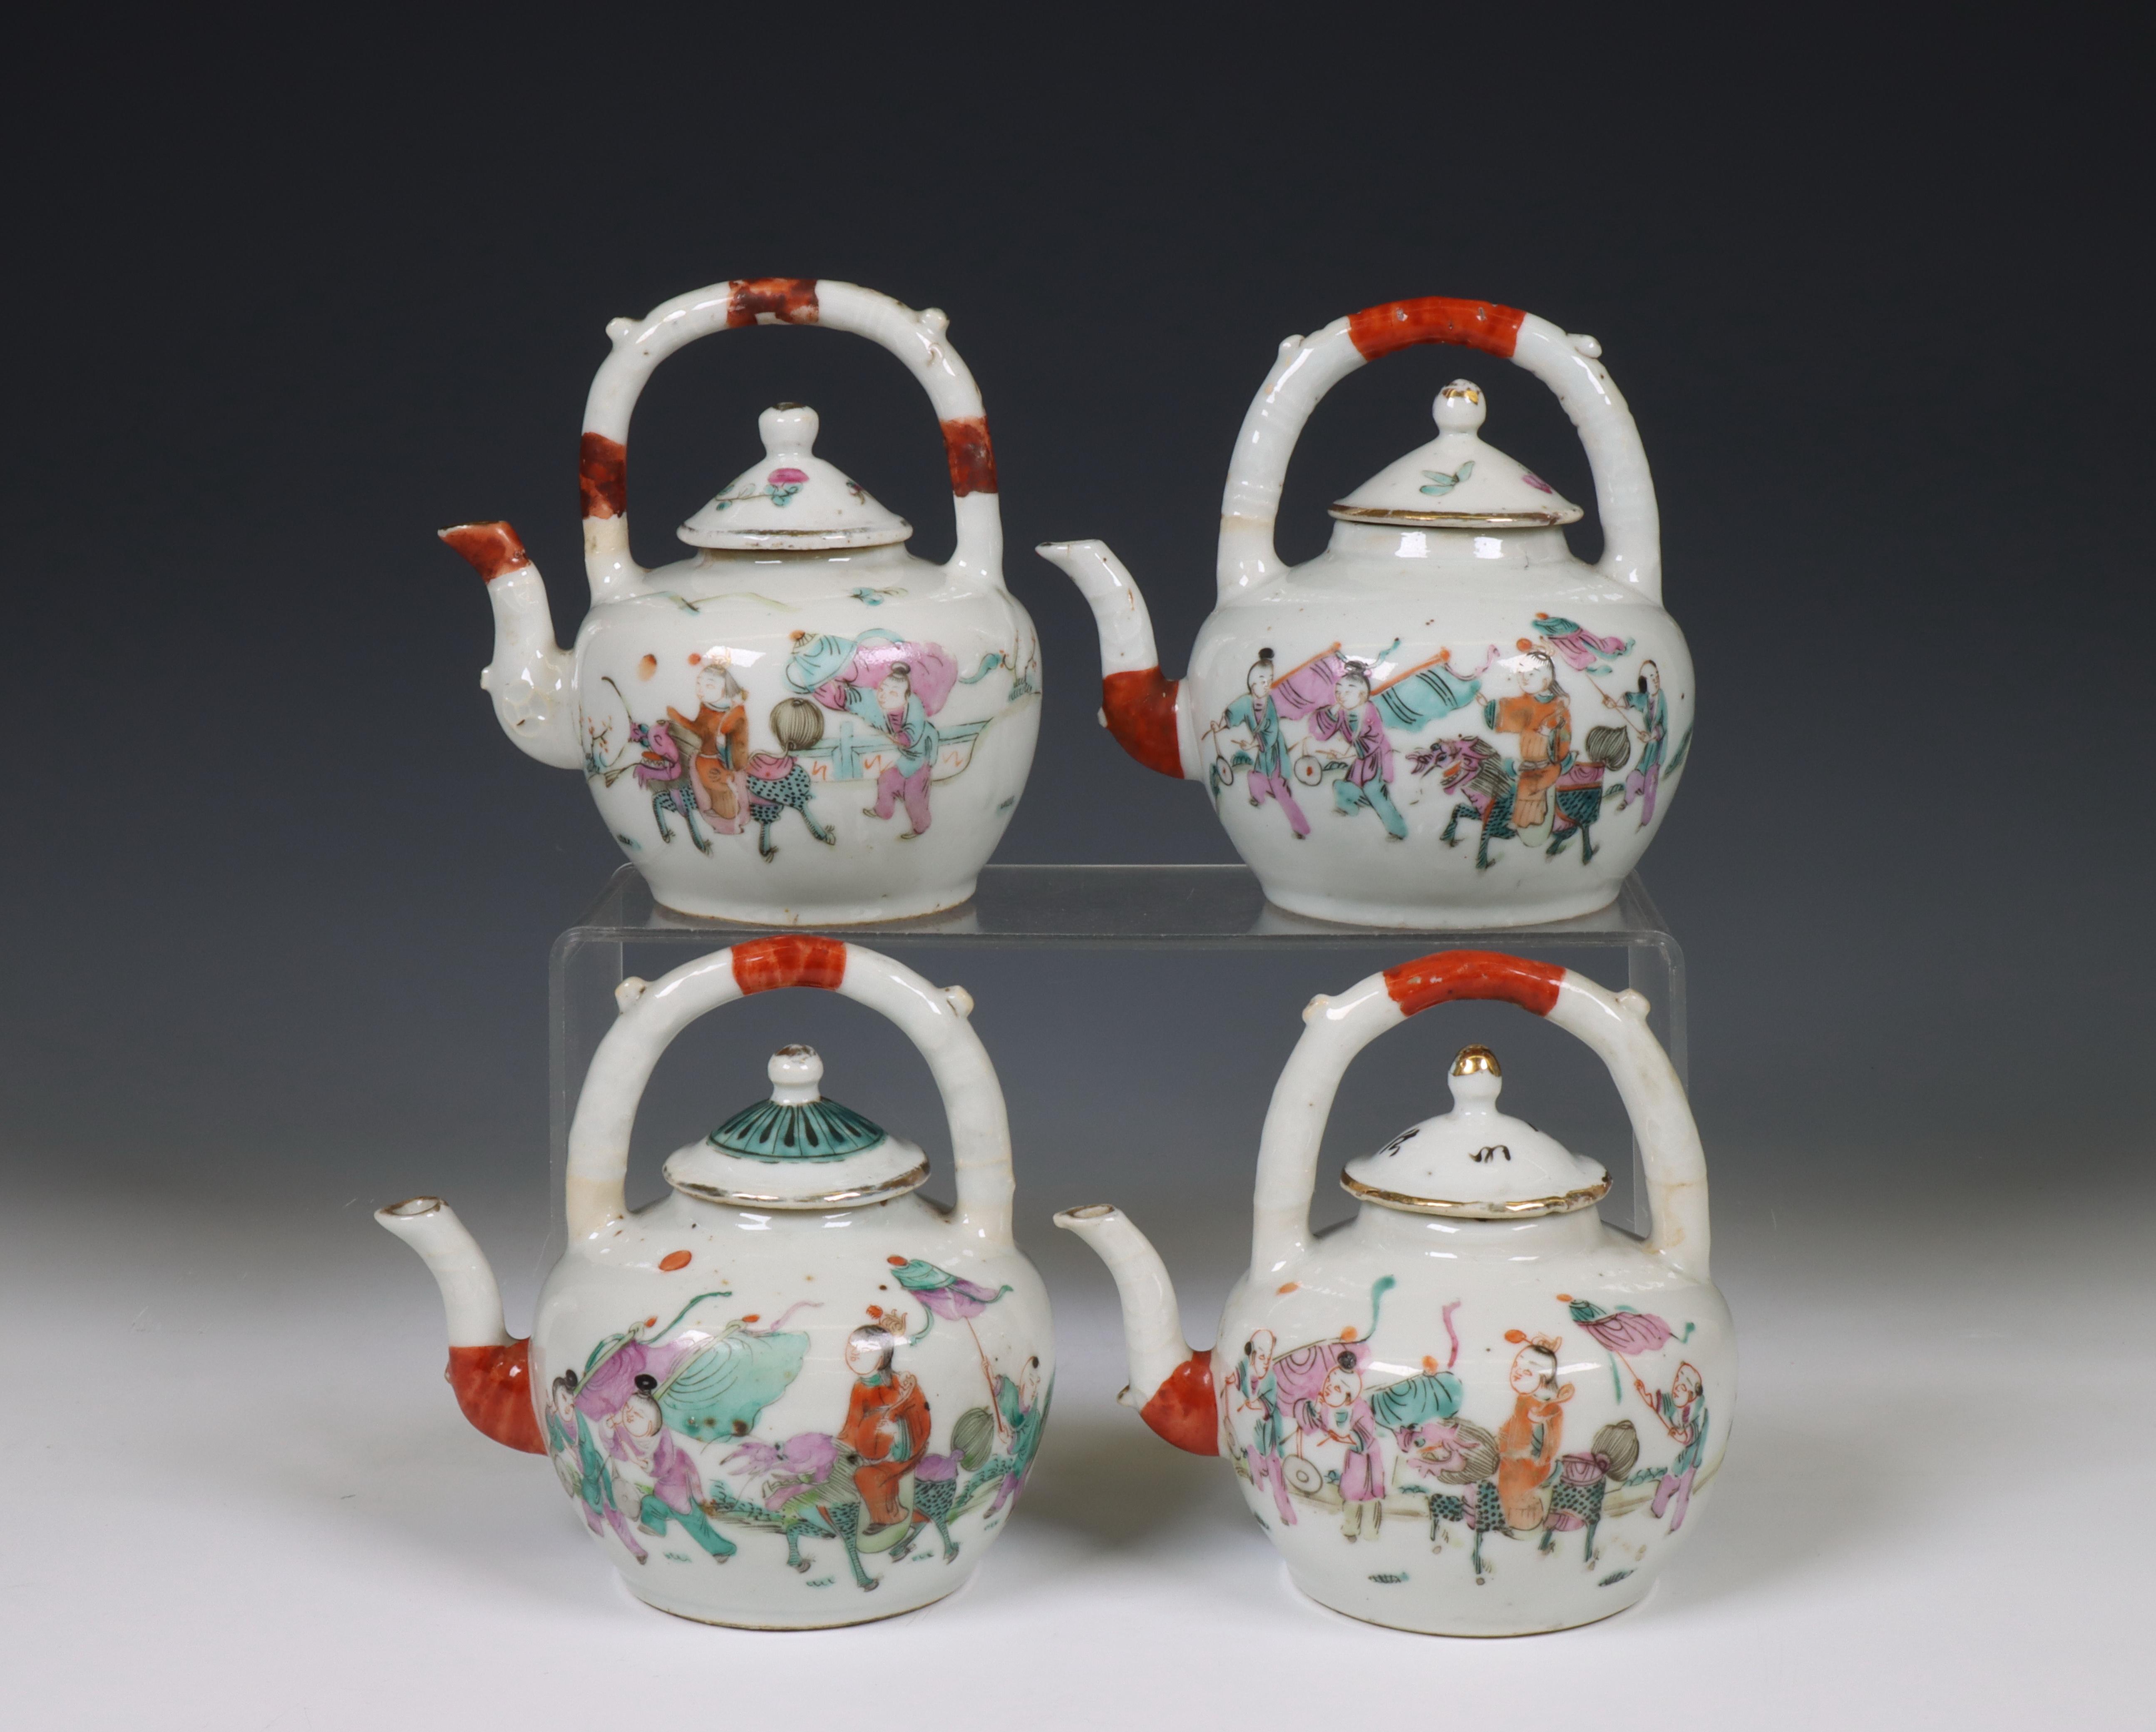 China, four famille rose porcelain teapots and covers, 19th-20th century,